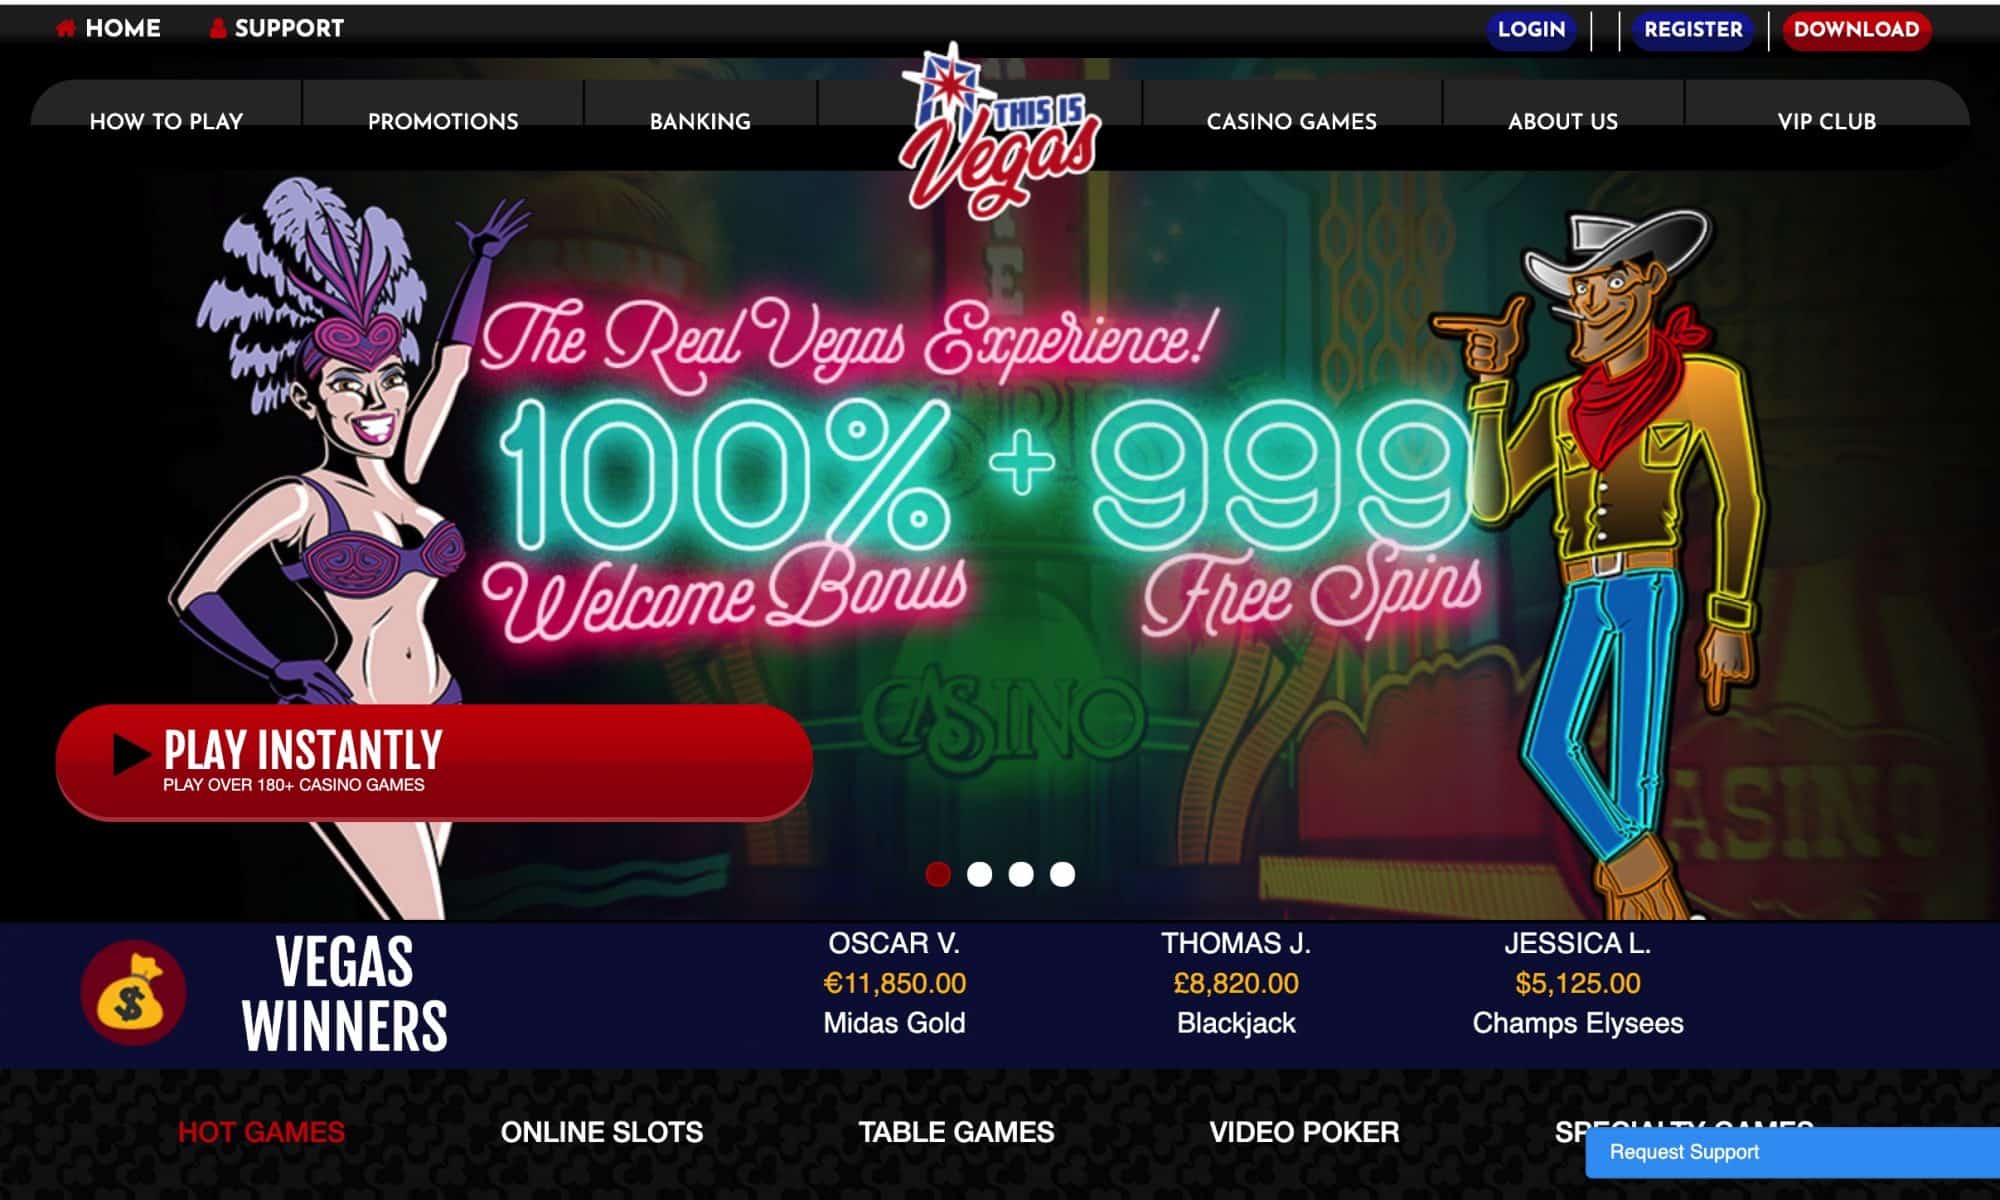 This Is Vegas - 100% welcome prize + 999 free spins